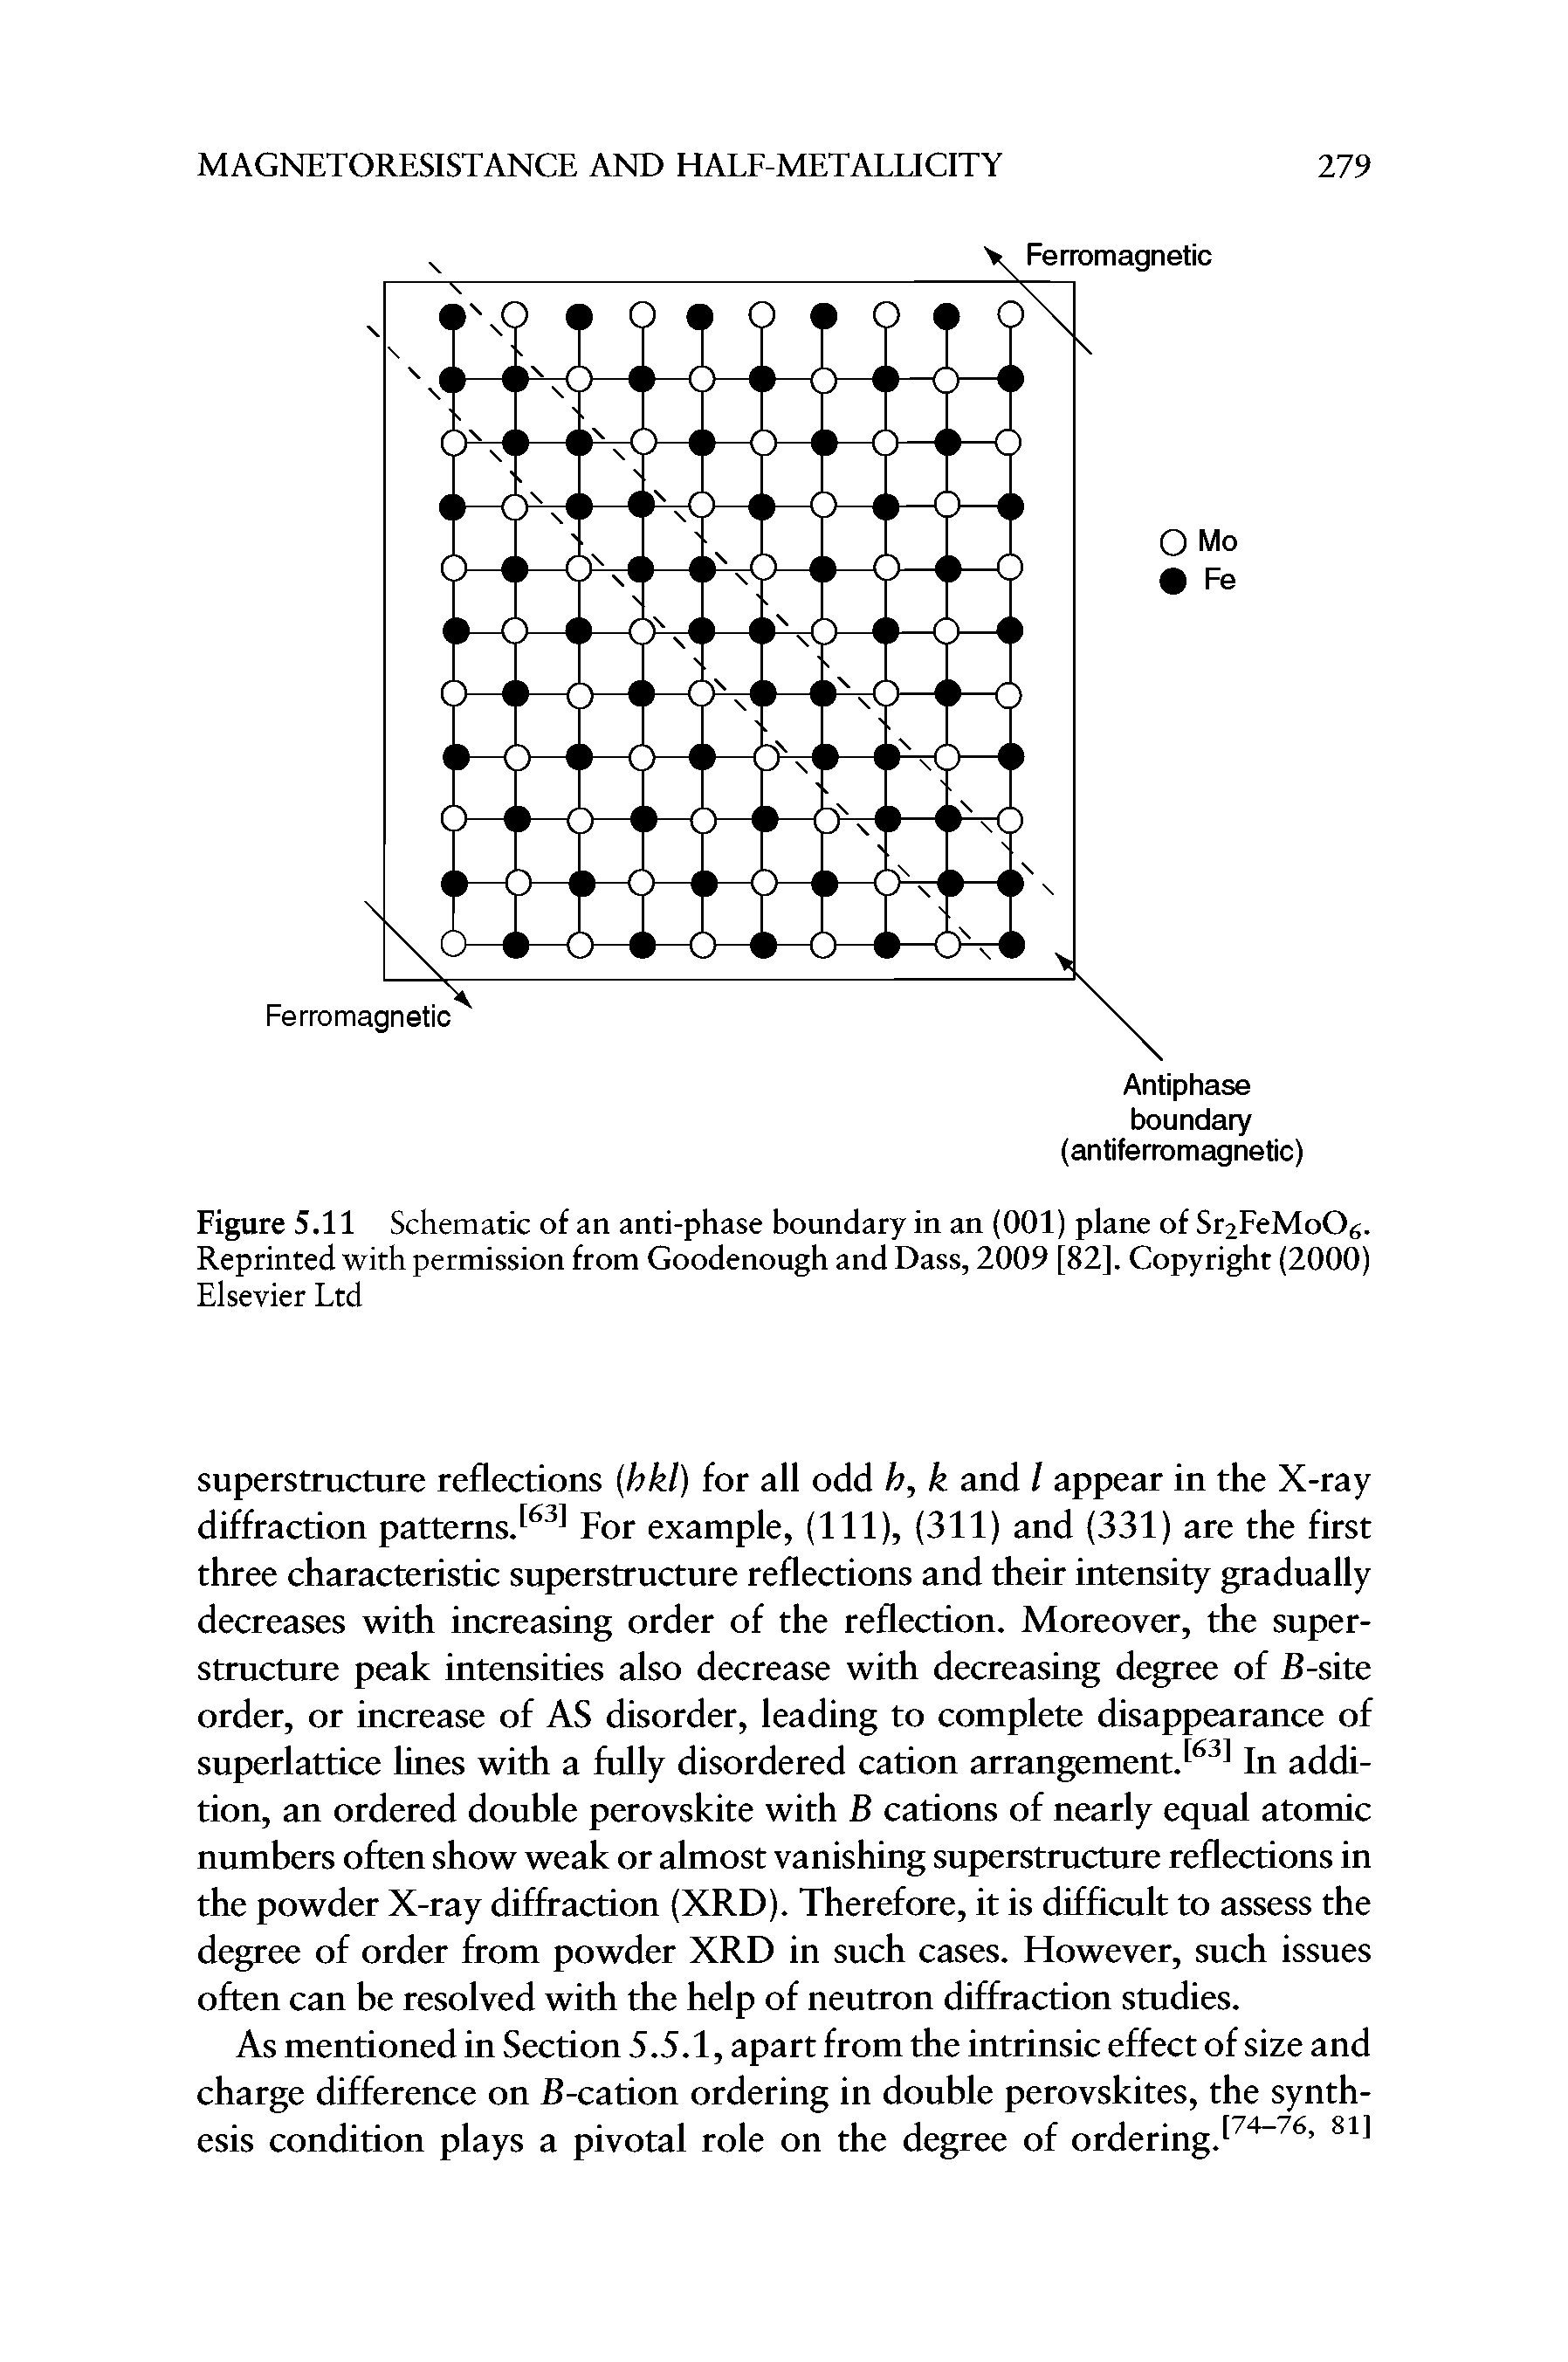 Figure 5.11 Schematic of an anti-phase boundary in an (001) plane of Sr2FeMoOg. Reprinted with permission from Goodenough and Dass, 2009 [82]. Copyright (2000)...